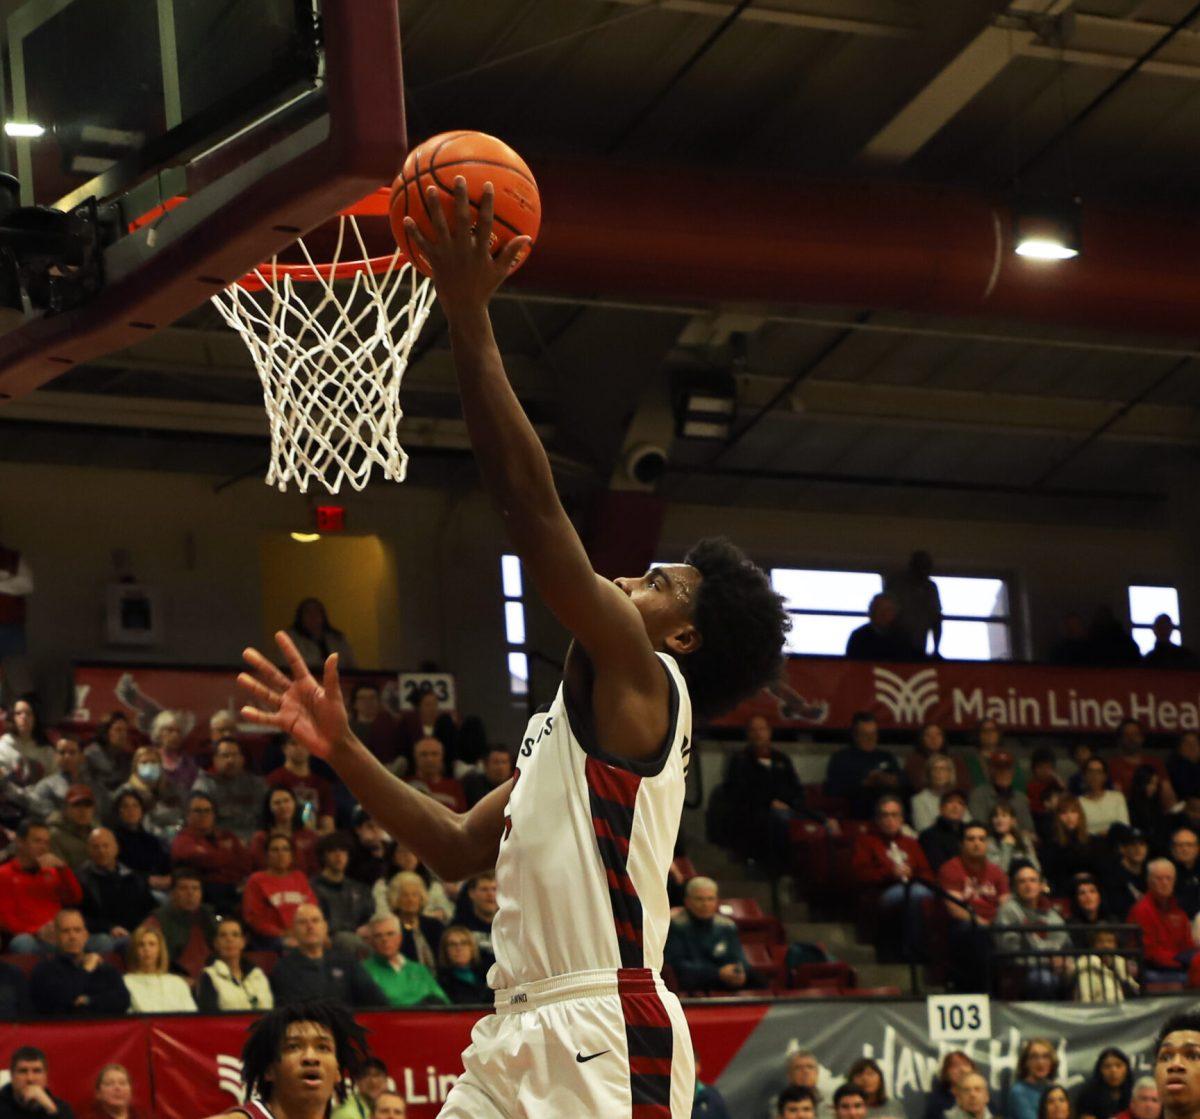 Cameron Brown scores at the St. Joe’s vs. UMass game Jan. 21. PHOTO: KELLY SHANNON ’24/THE HAWK